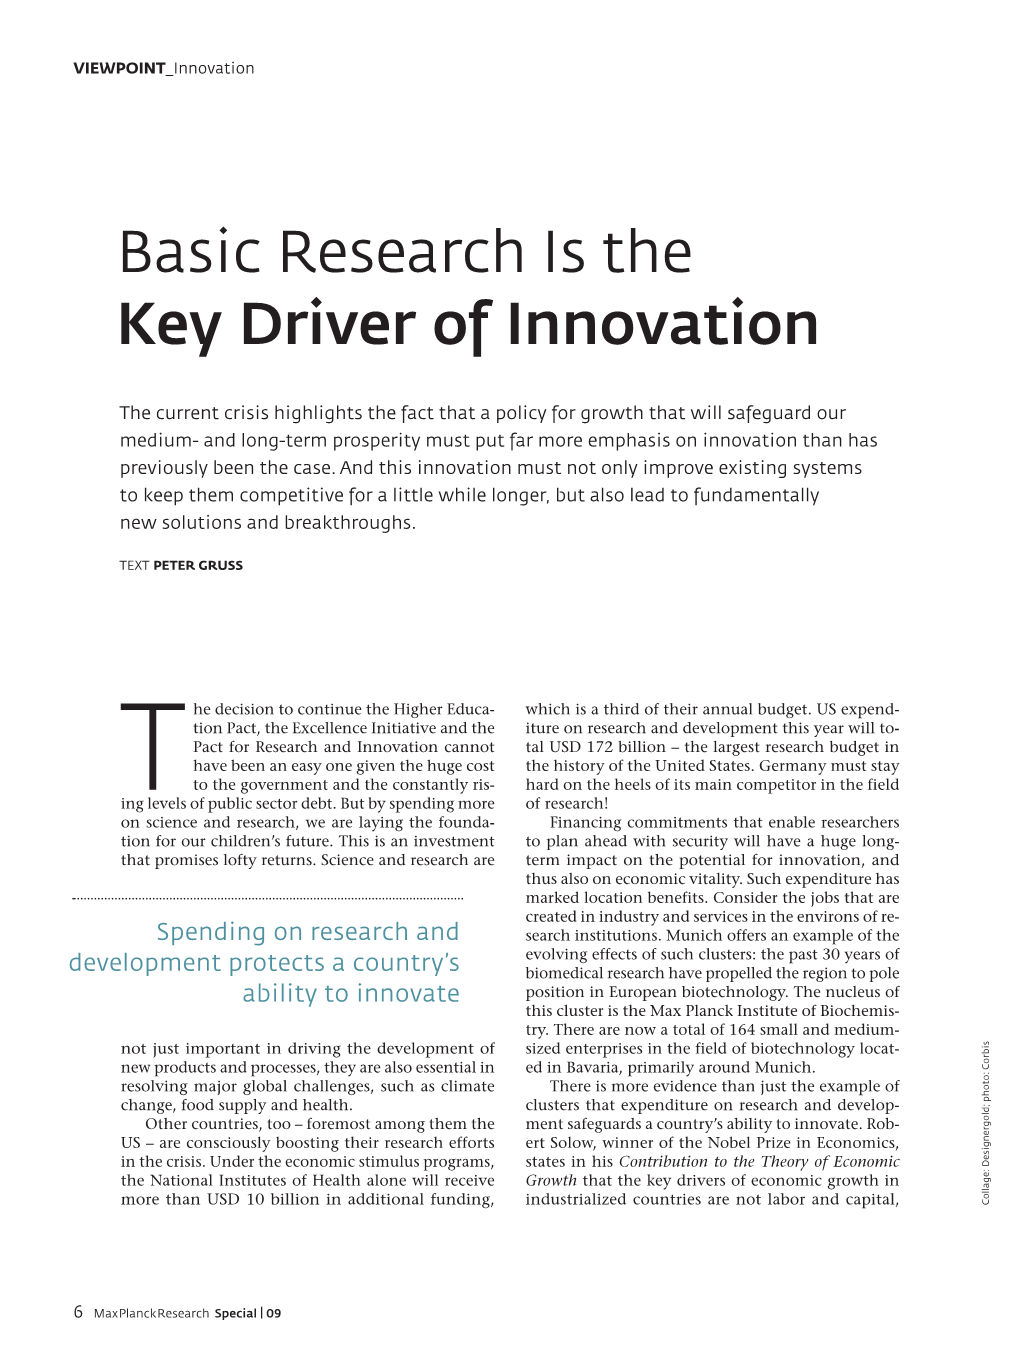 Basic Research Is the Key Driver of Innovation